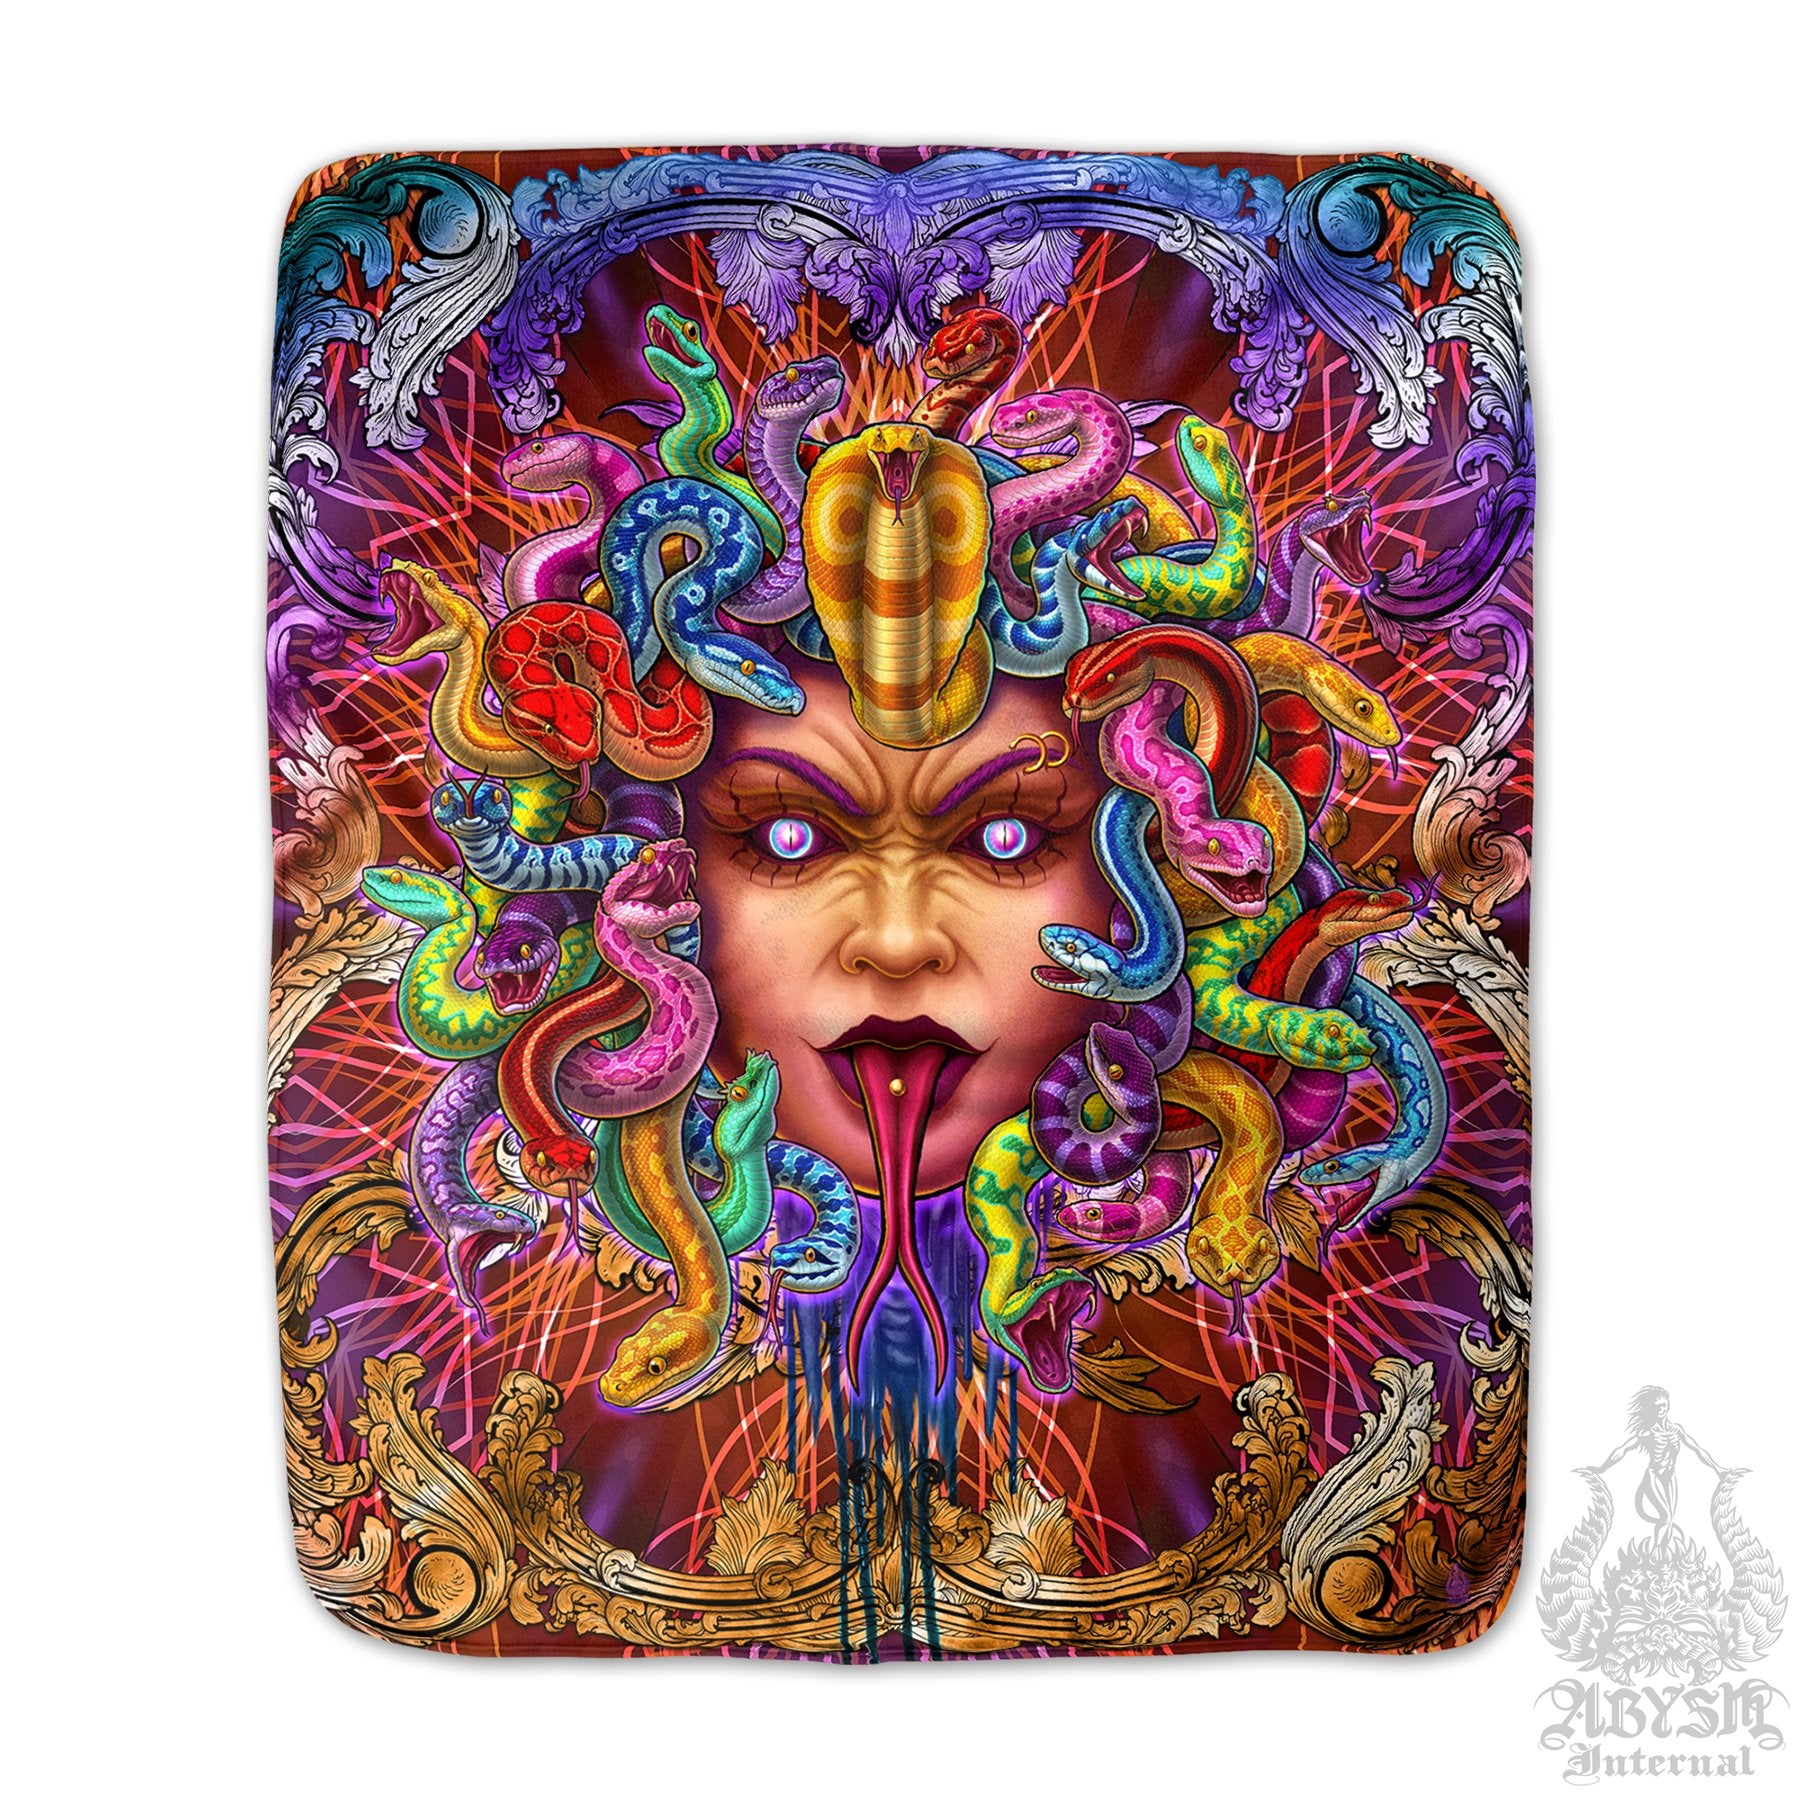 Indie Sherpa Fleece Throw Blanket, Eclectic & Alternative Decor, Eclectic and Funky Gift - Psychedelic Medusa, 2 Faces - Abysm Internal